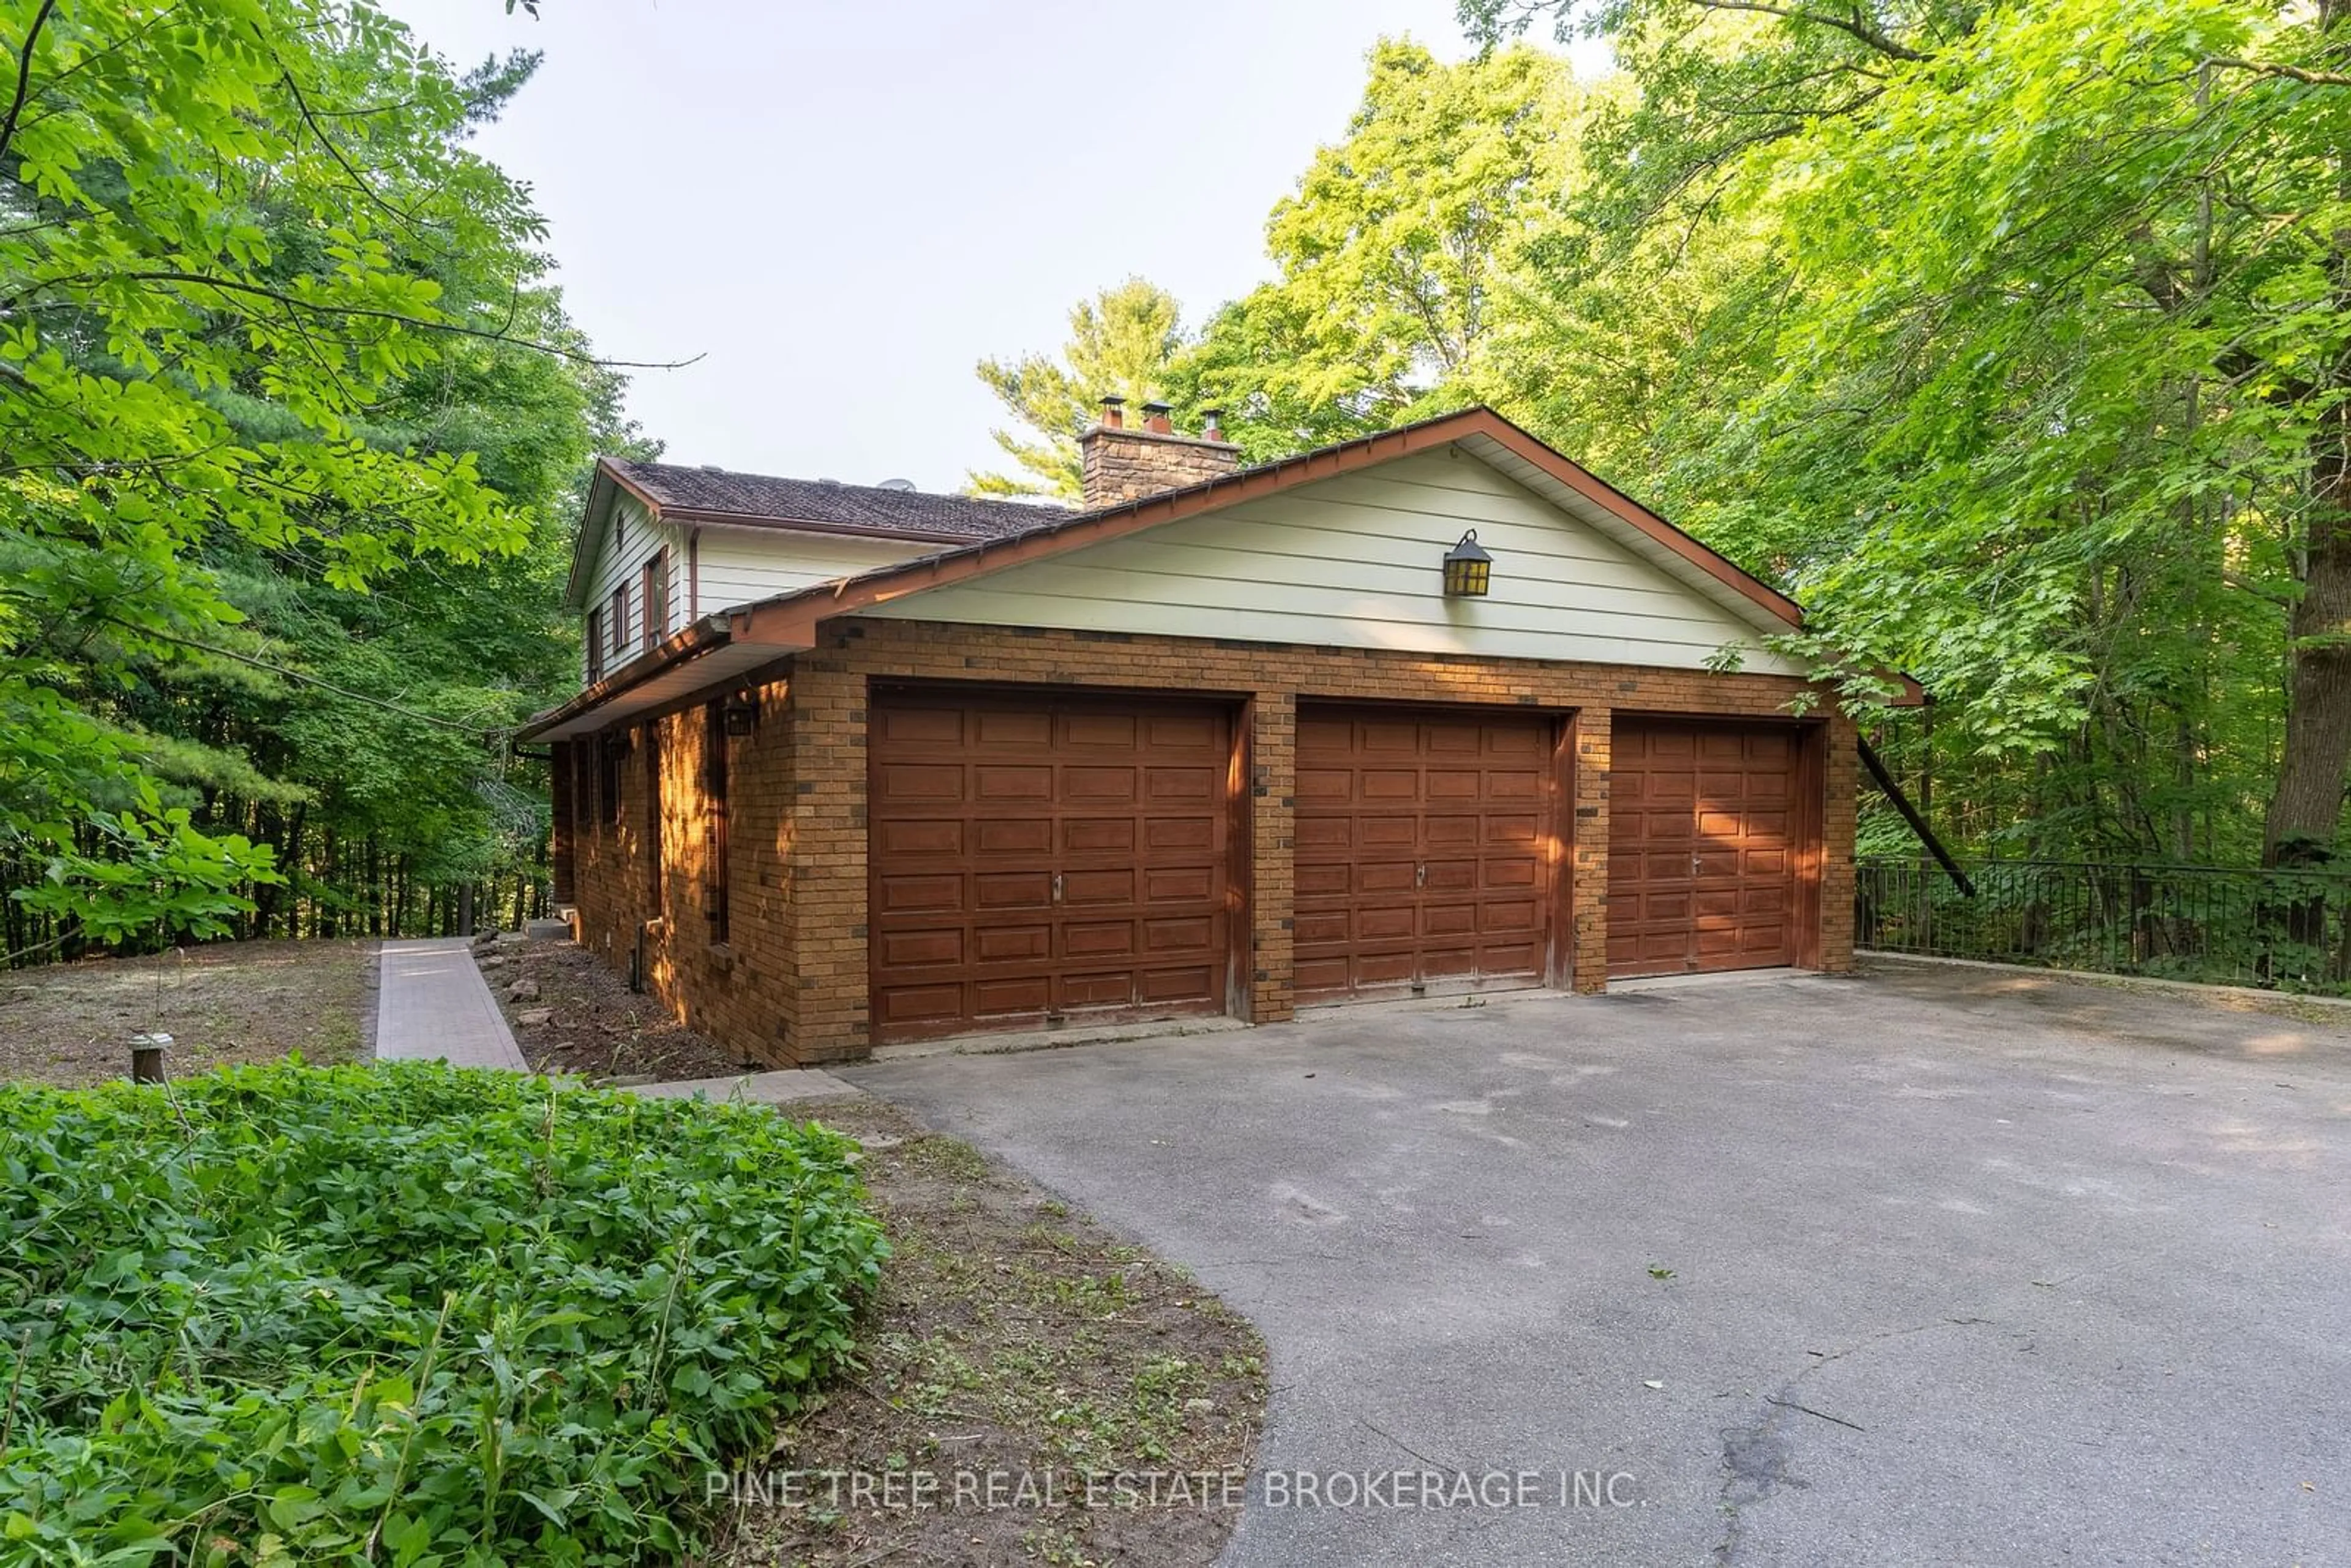 Indoor garage for 16581 Mccowan Rd, Whitchurch-Stouffville Ontario L4A 2B3